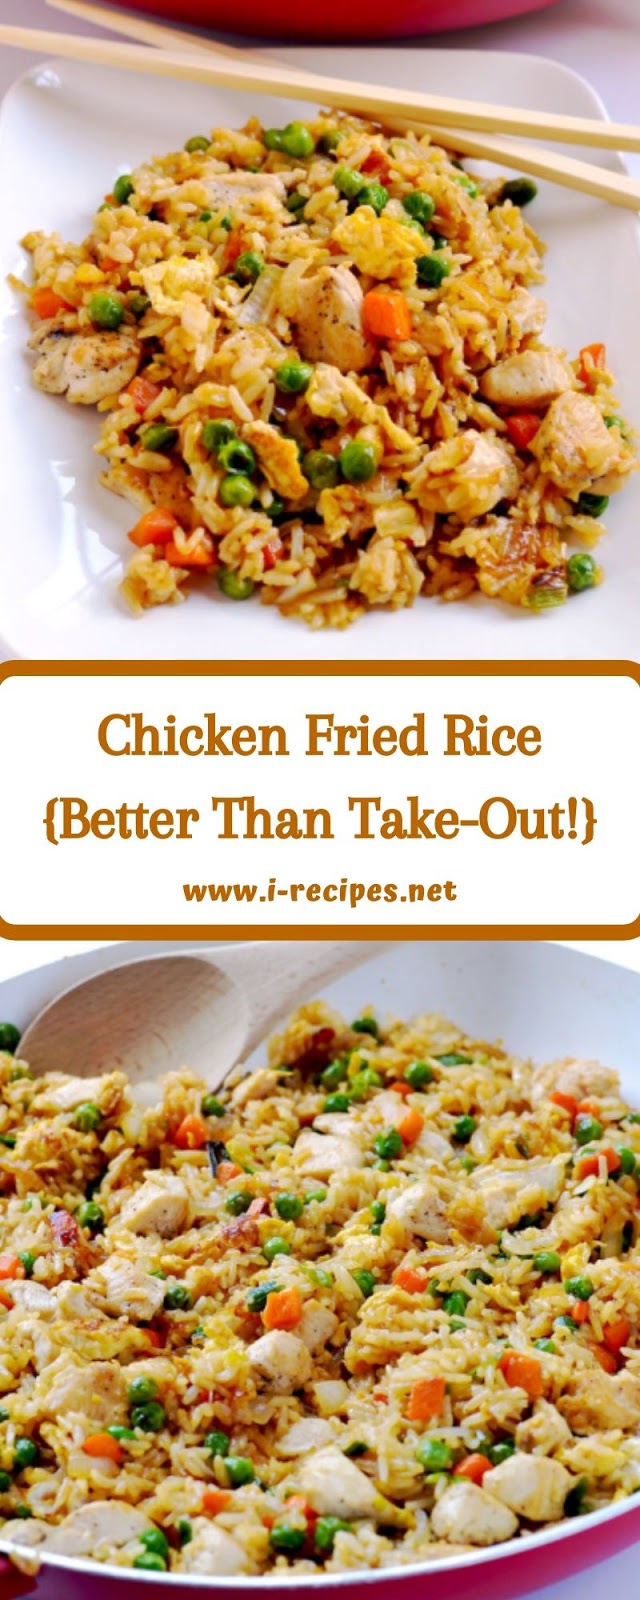 Chicken Fried Rice {Better Than Take-Out!}